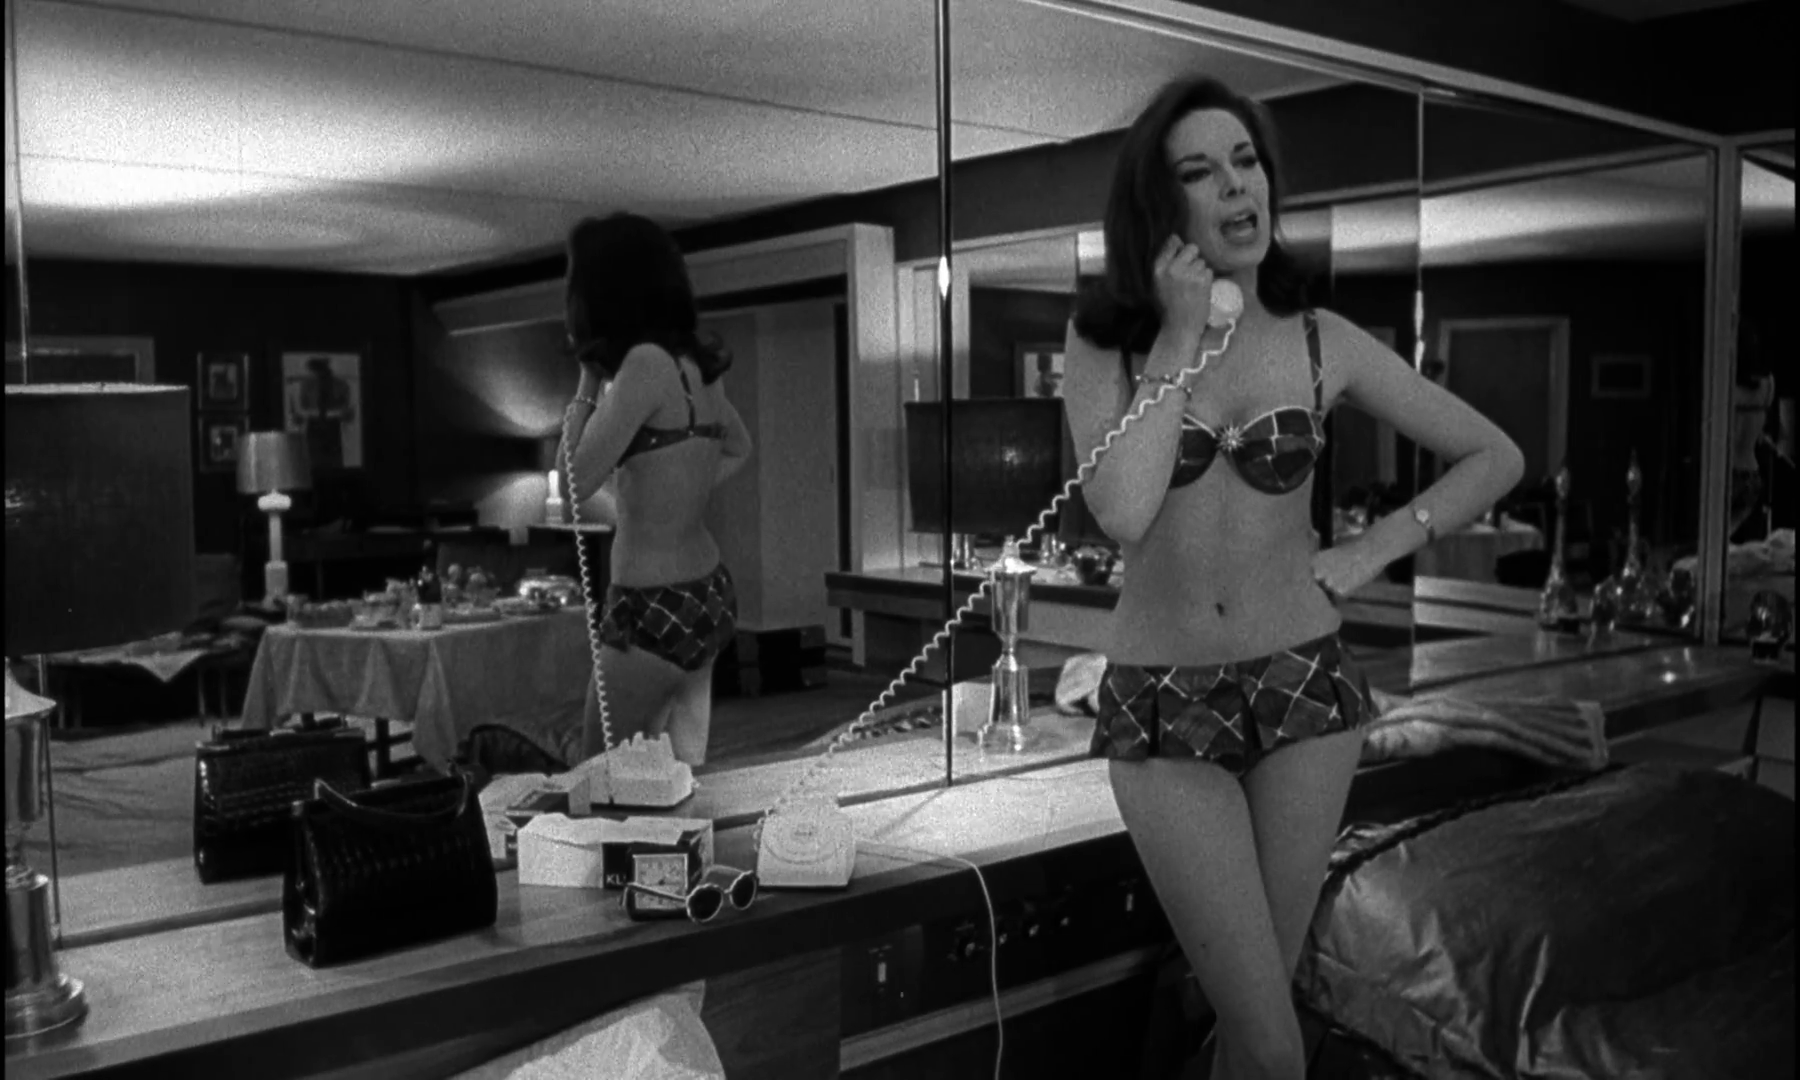 Happy Birthday to Tracy Reed, here in DR. STRANGELOVE! 